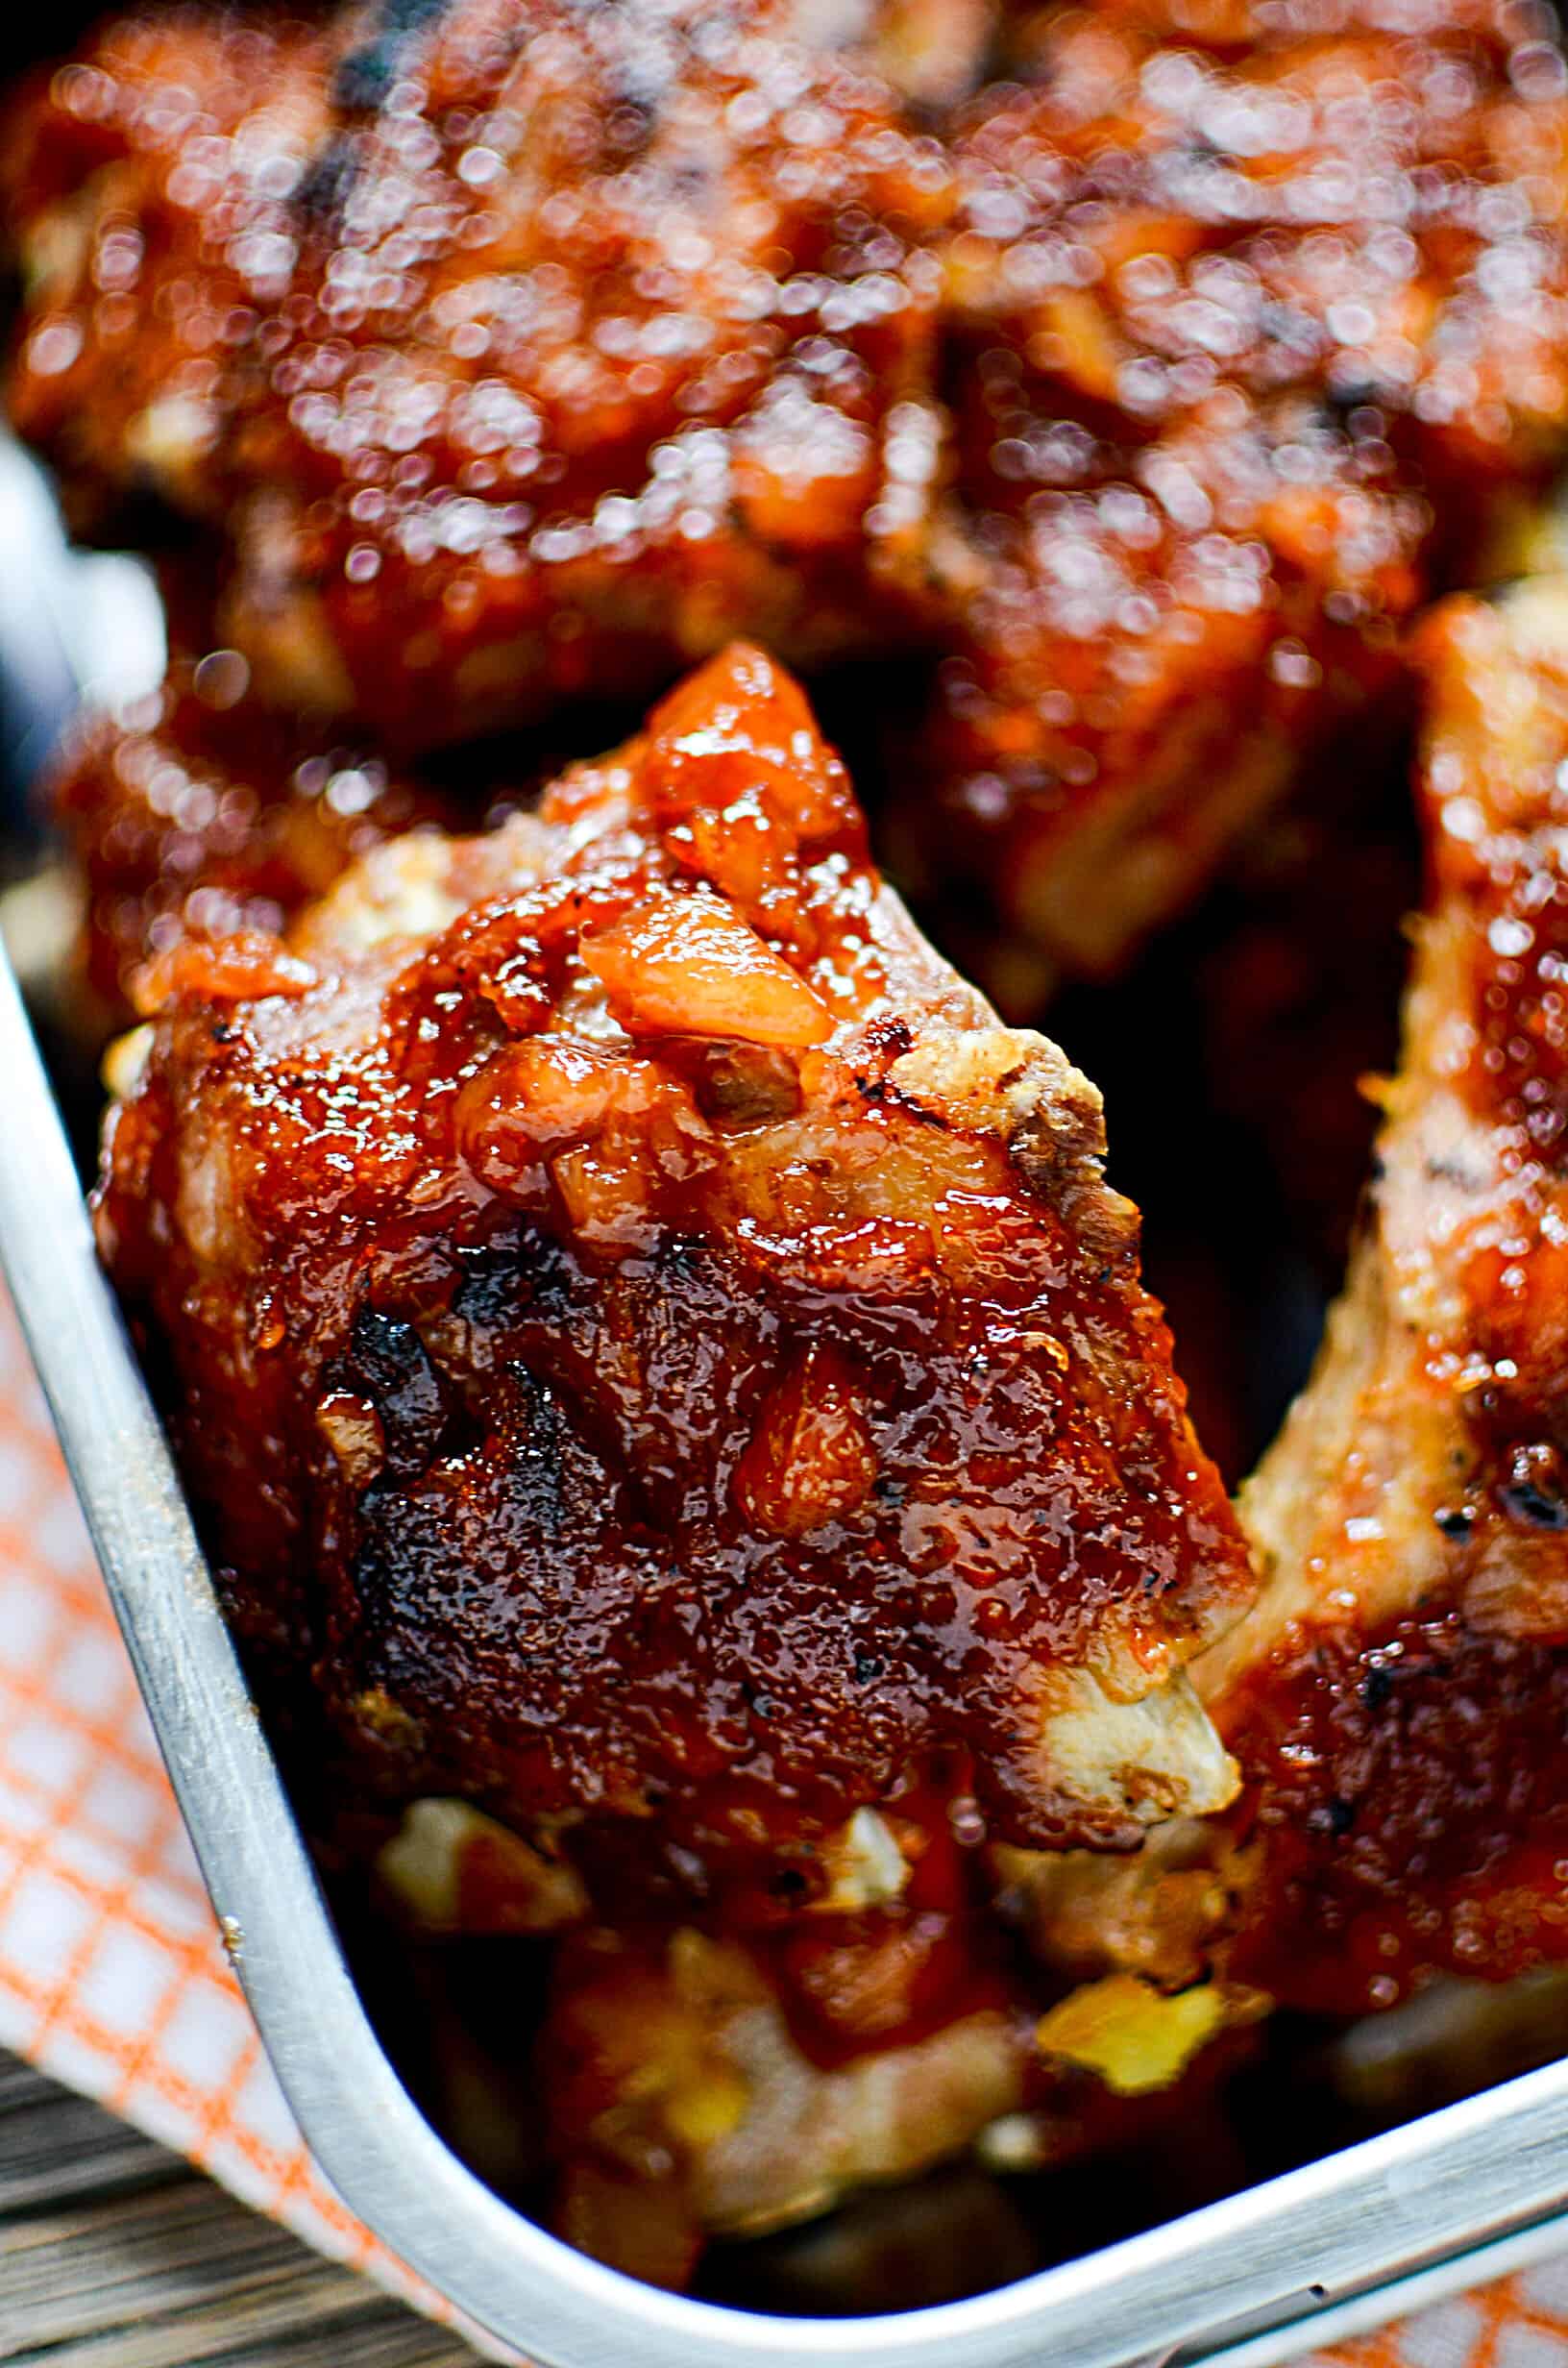 Pineapple BBQ Instant Pot Ribs - Fingerlicking good ribs ready to eat.